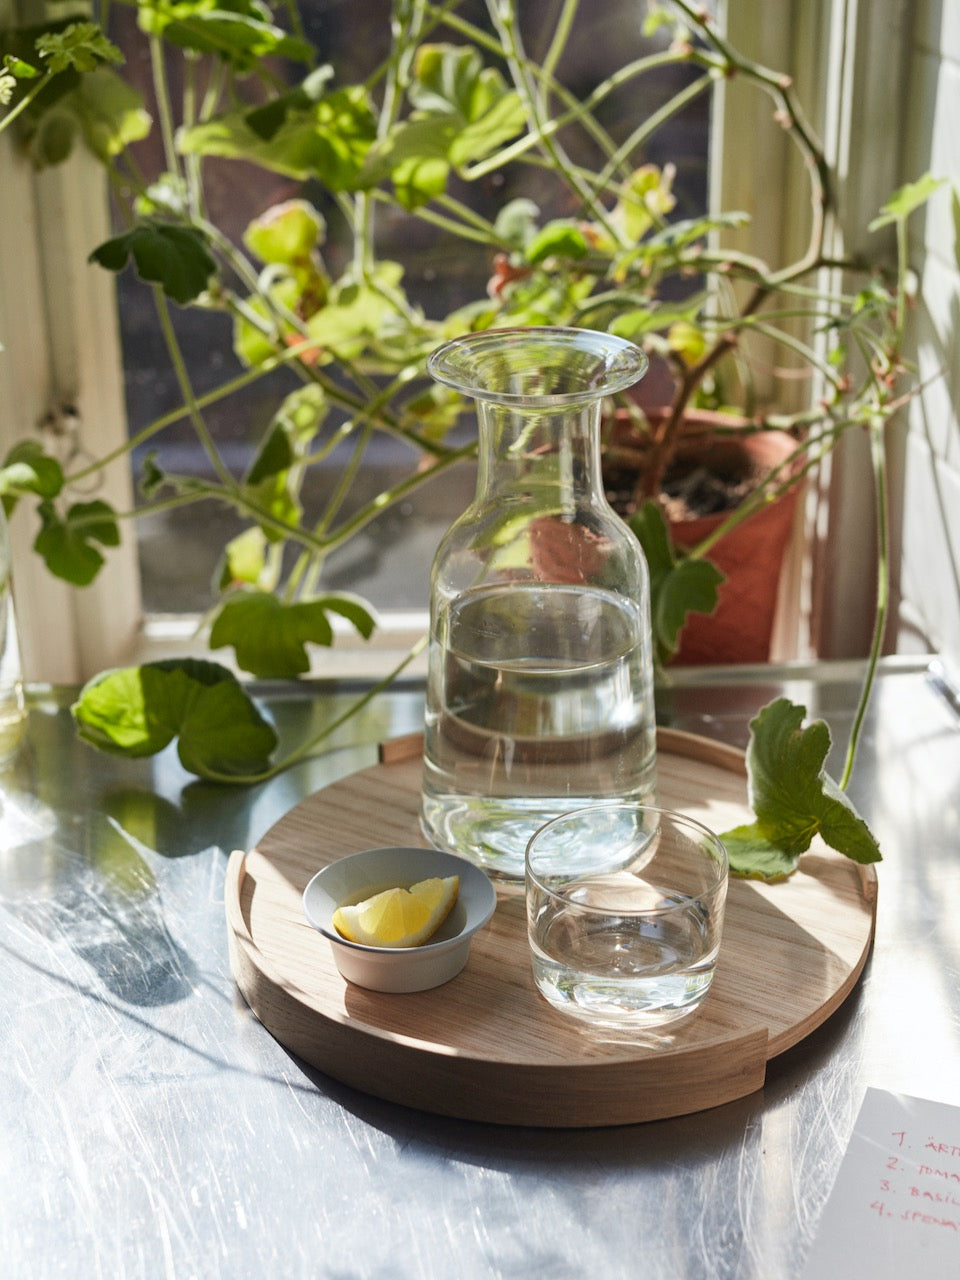 A Hammer Decanter by Skagerak on a wooden tray next to a window.